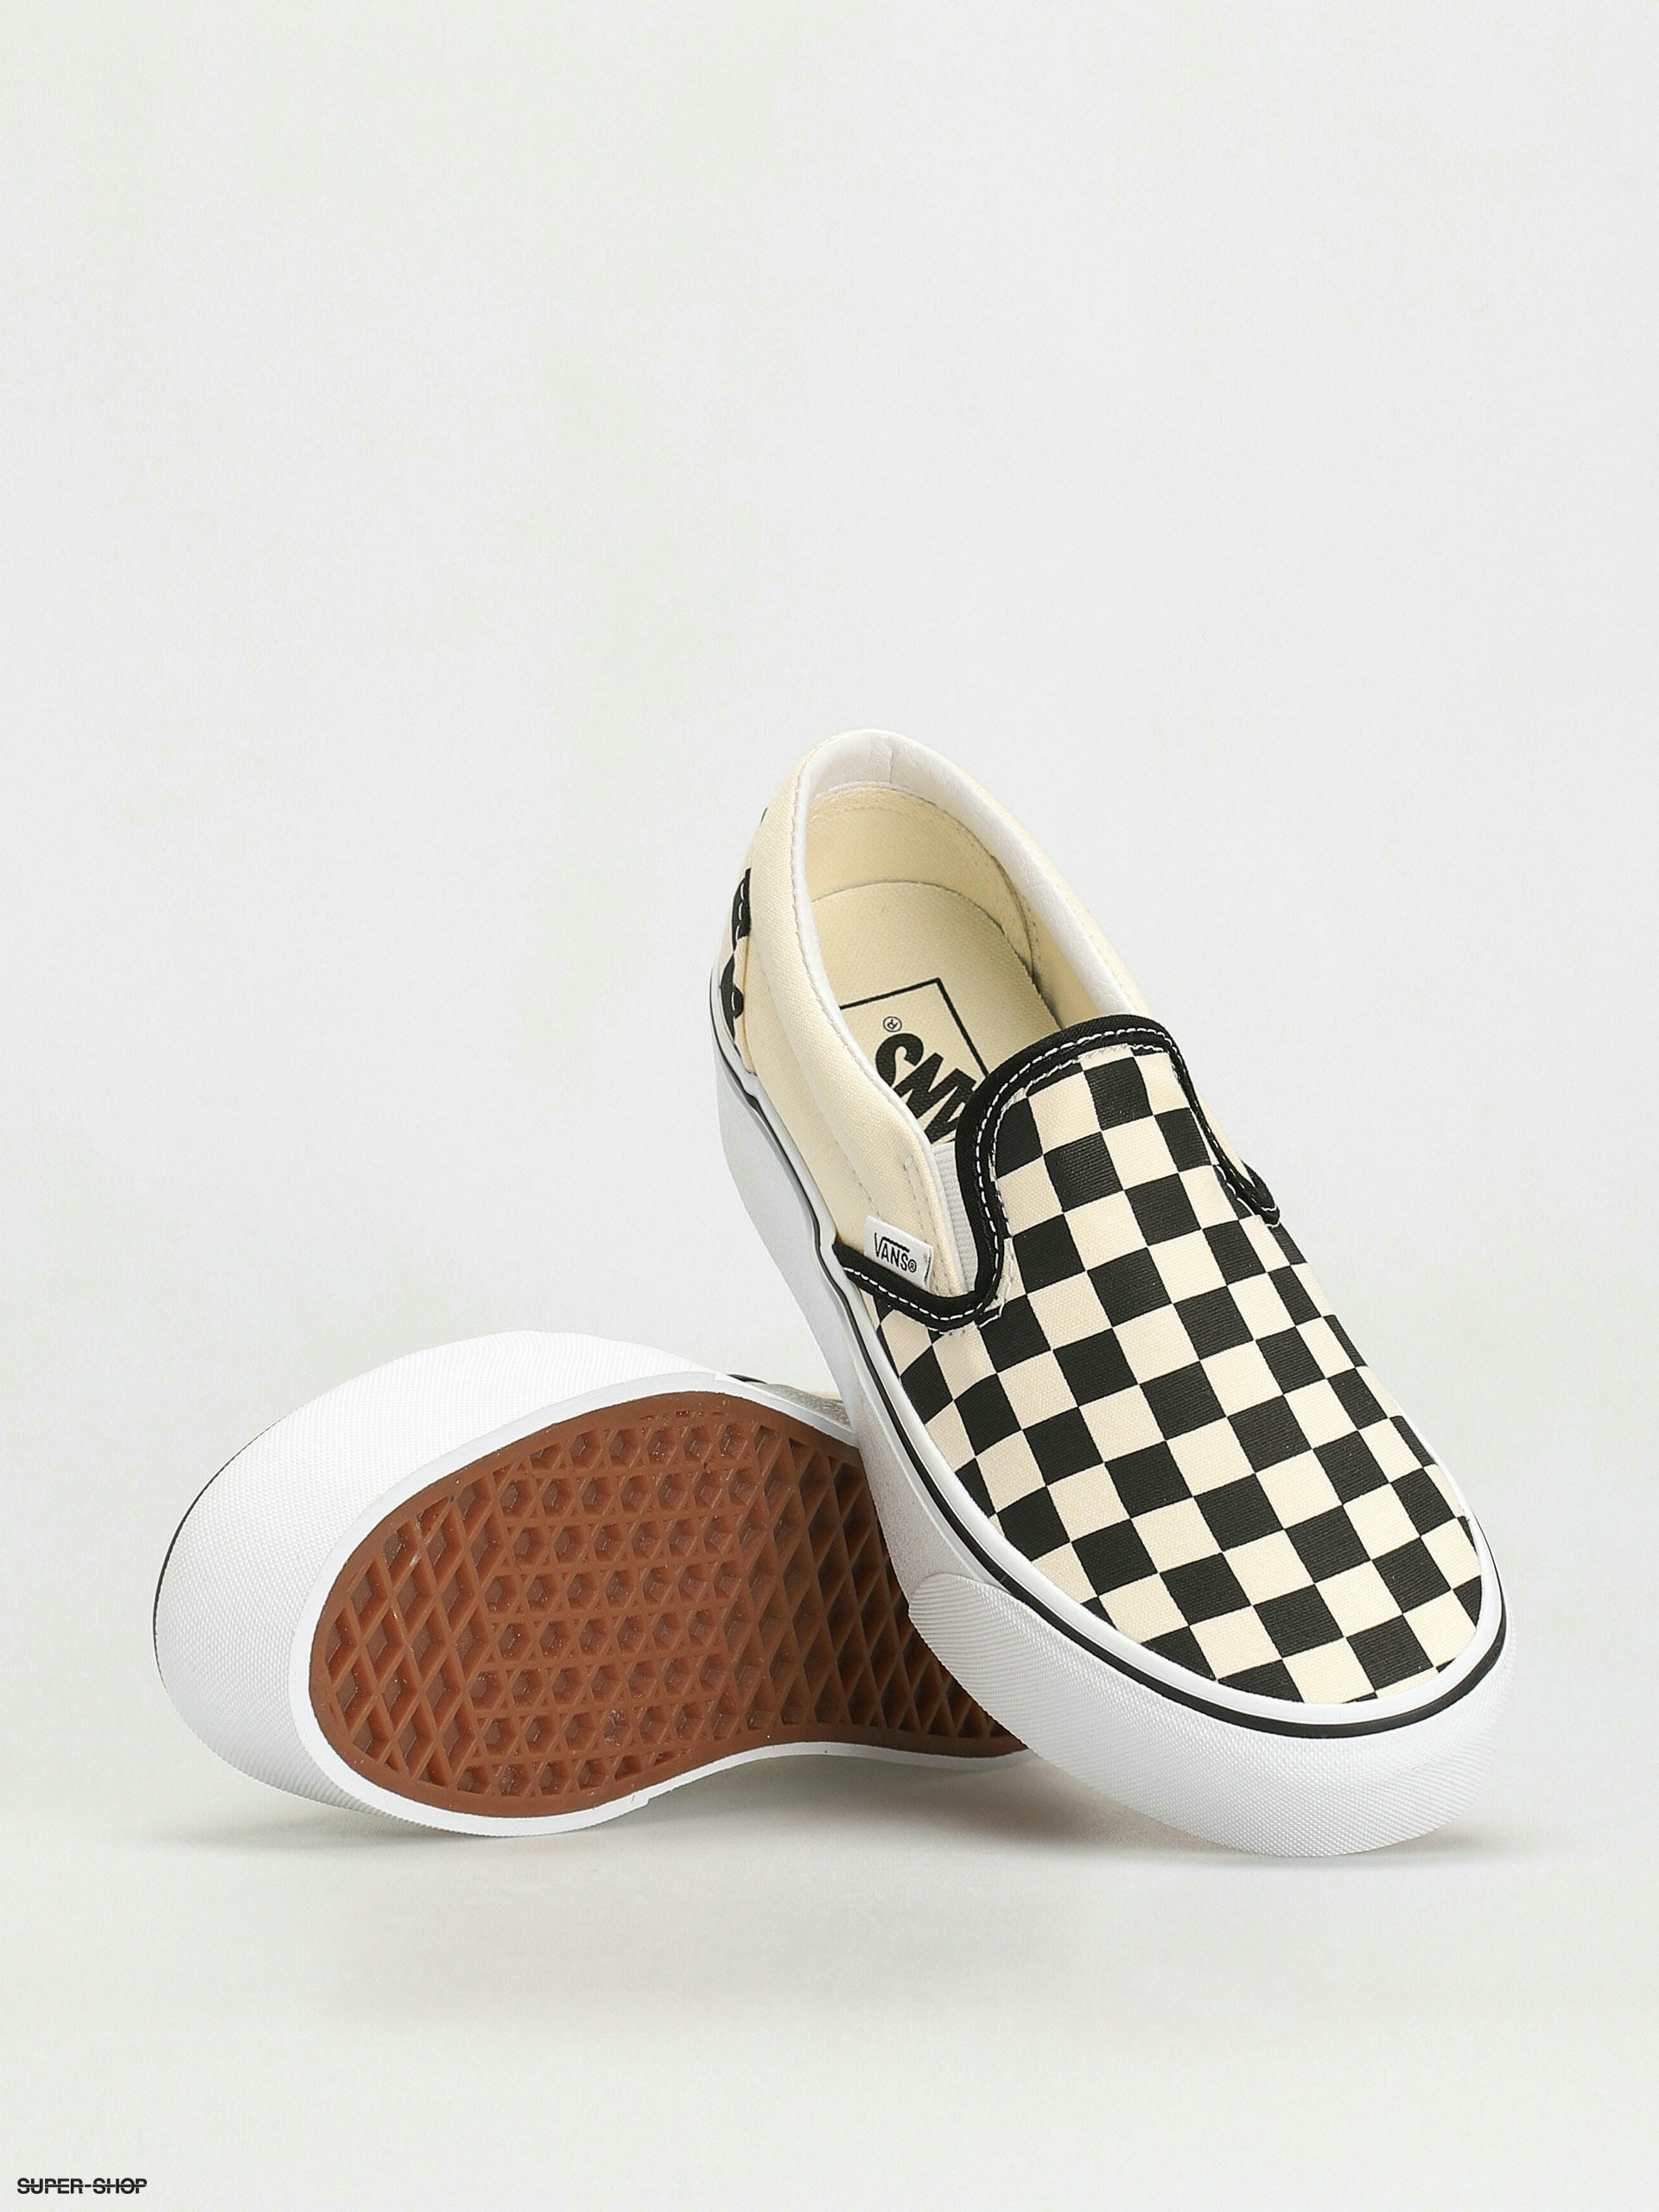 Vans Classic Slip On Stackform Shoes (checkerboard black/classic white)